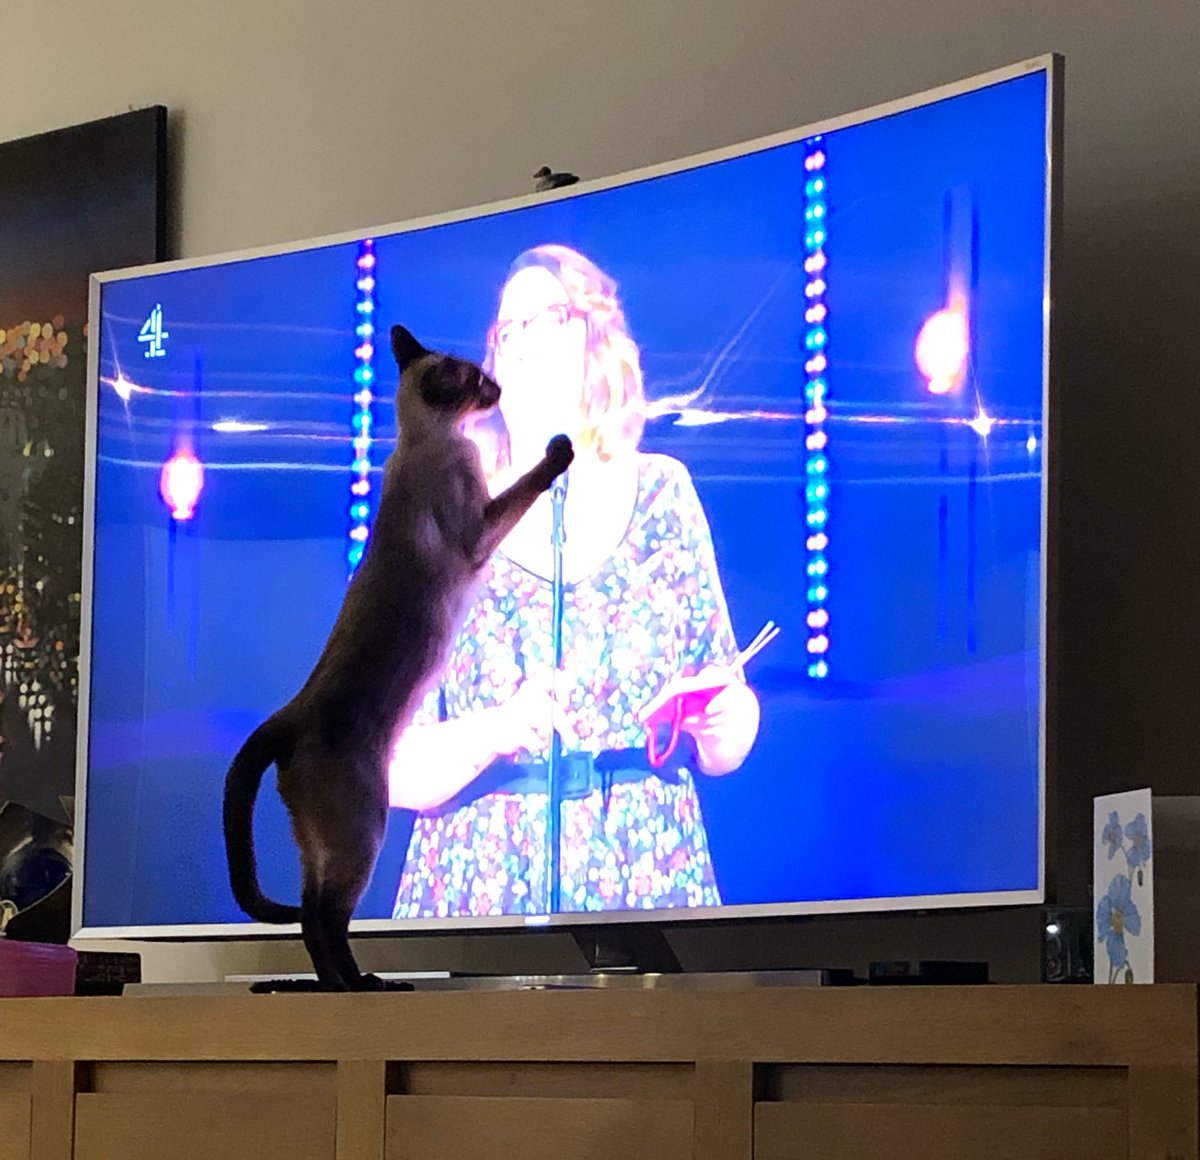 Lily knows a cat lover when she sees one 😂 #sarahmillican